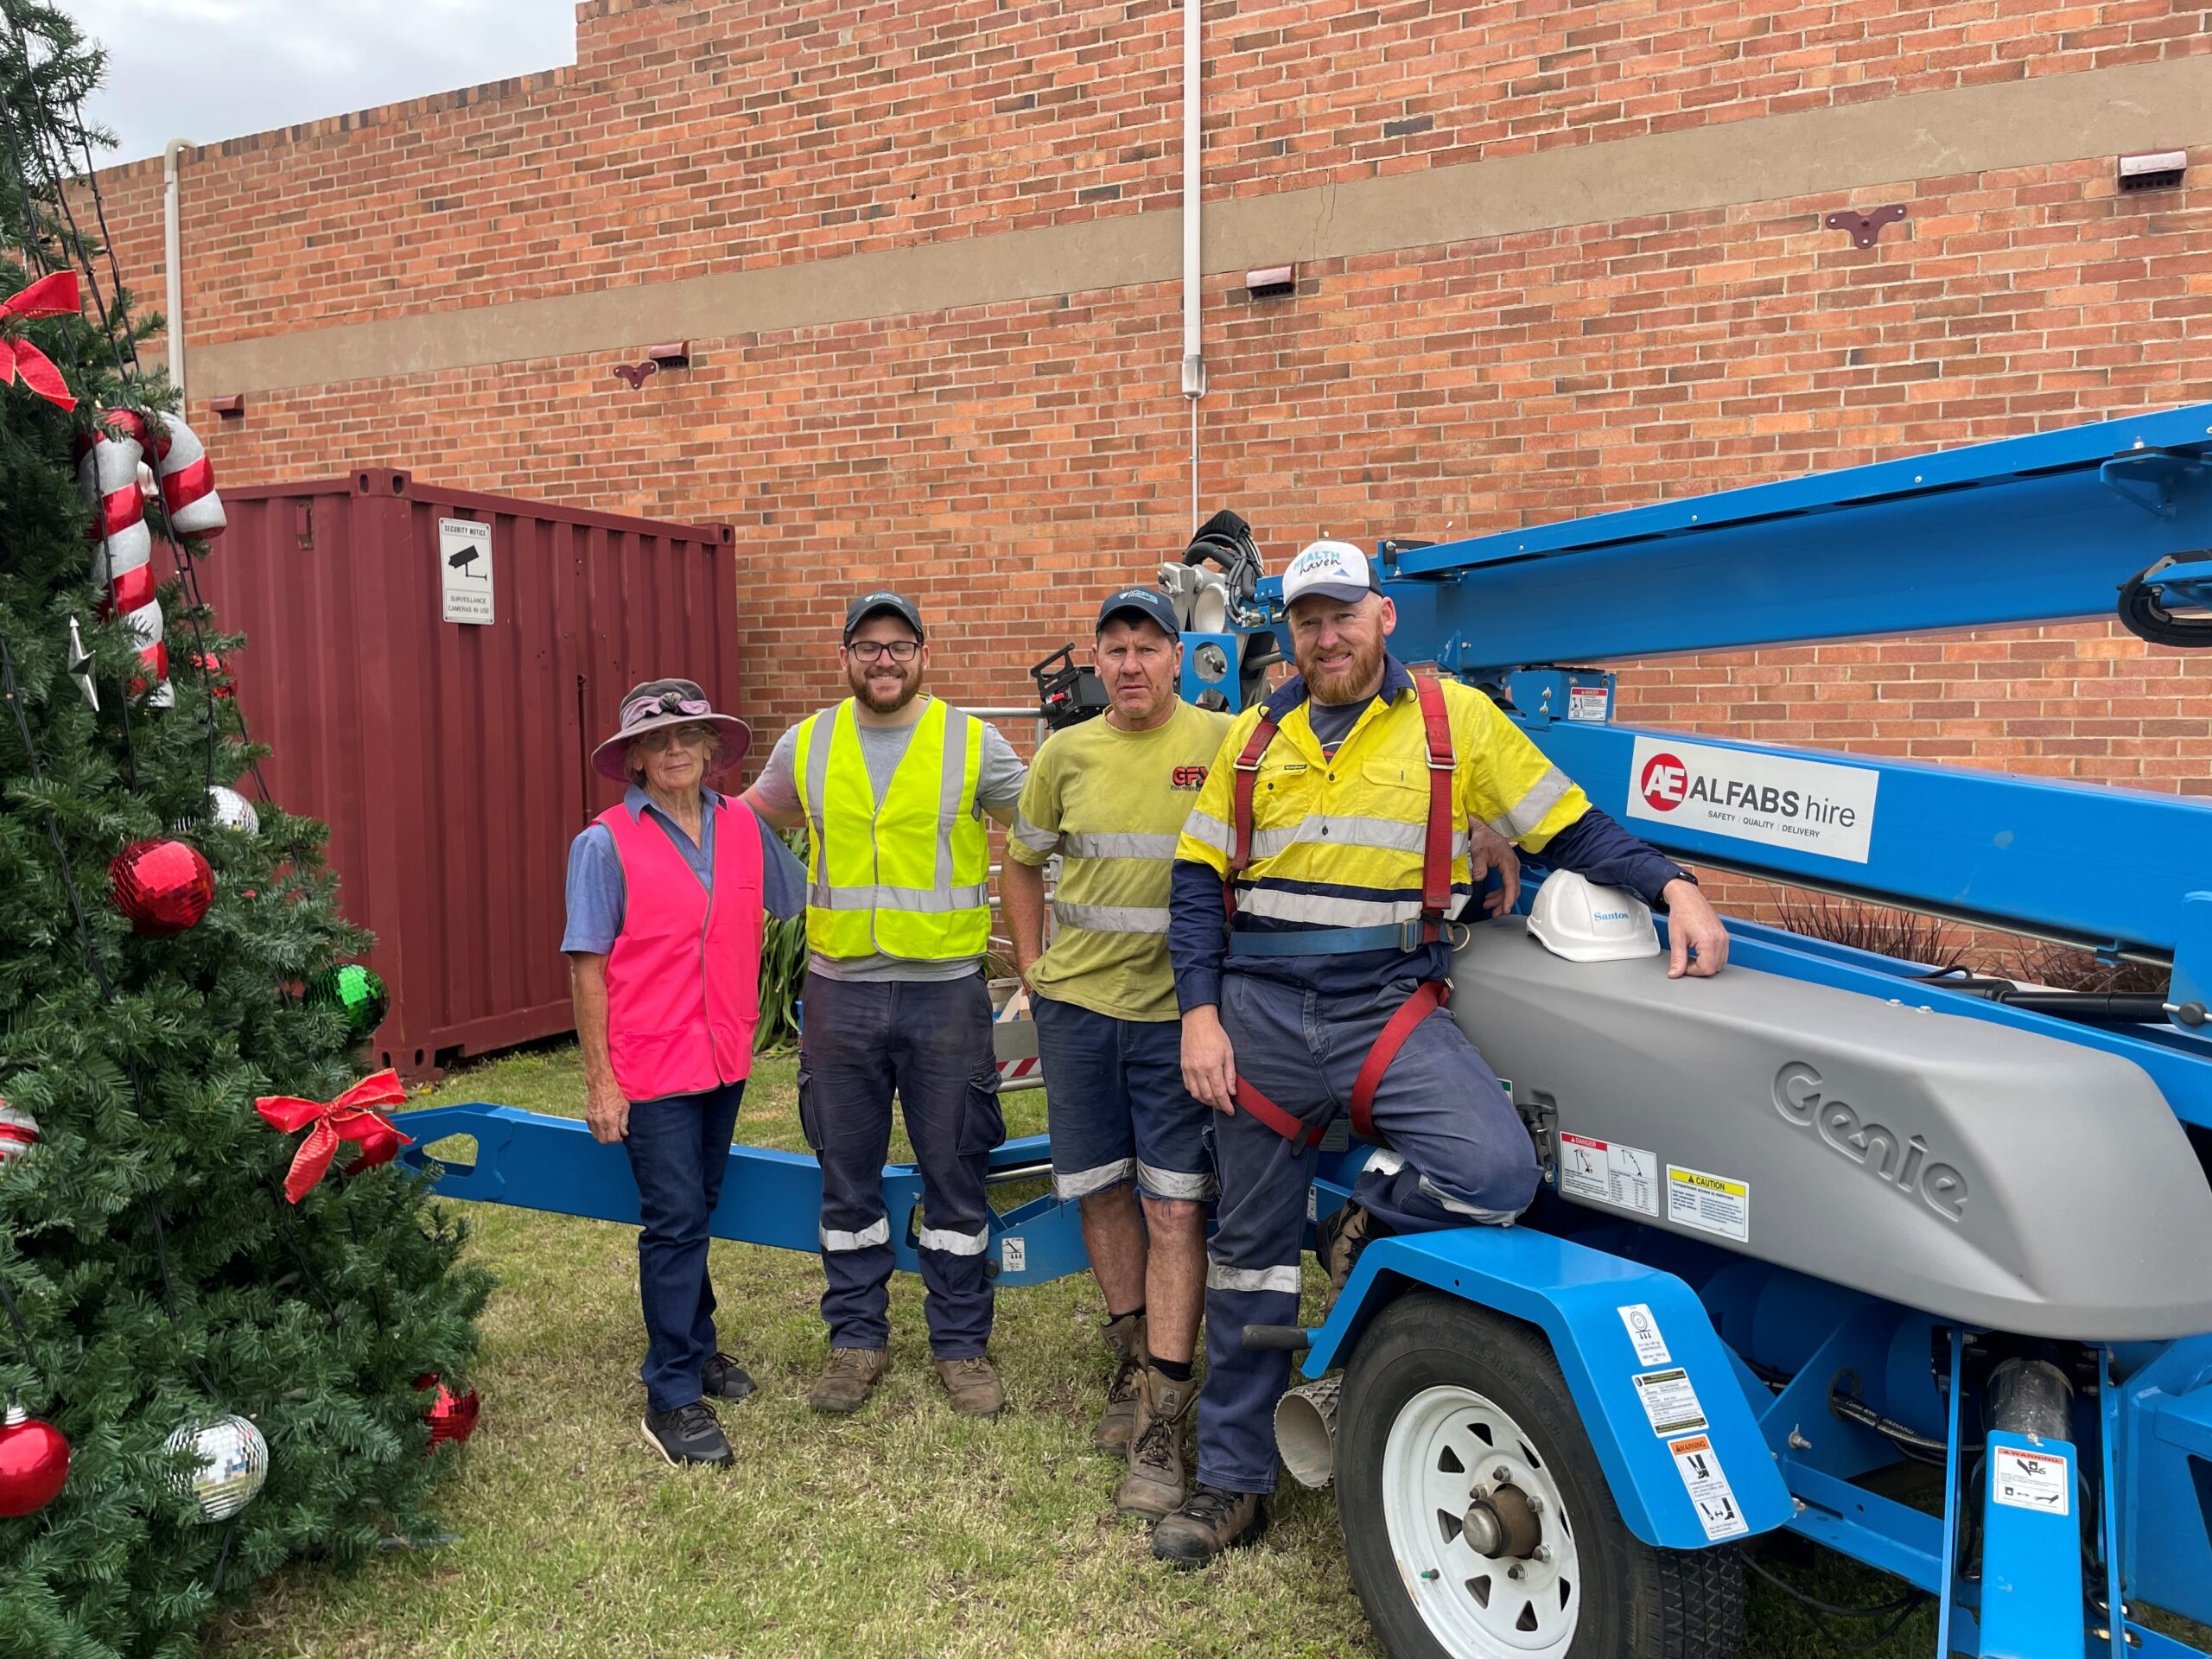 Jenny, Mitchell, Andrew and Tim Gale helped to erect the Chamber’s Christmas tree, right, at the Post Office lawn on Sunday.